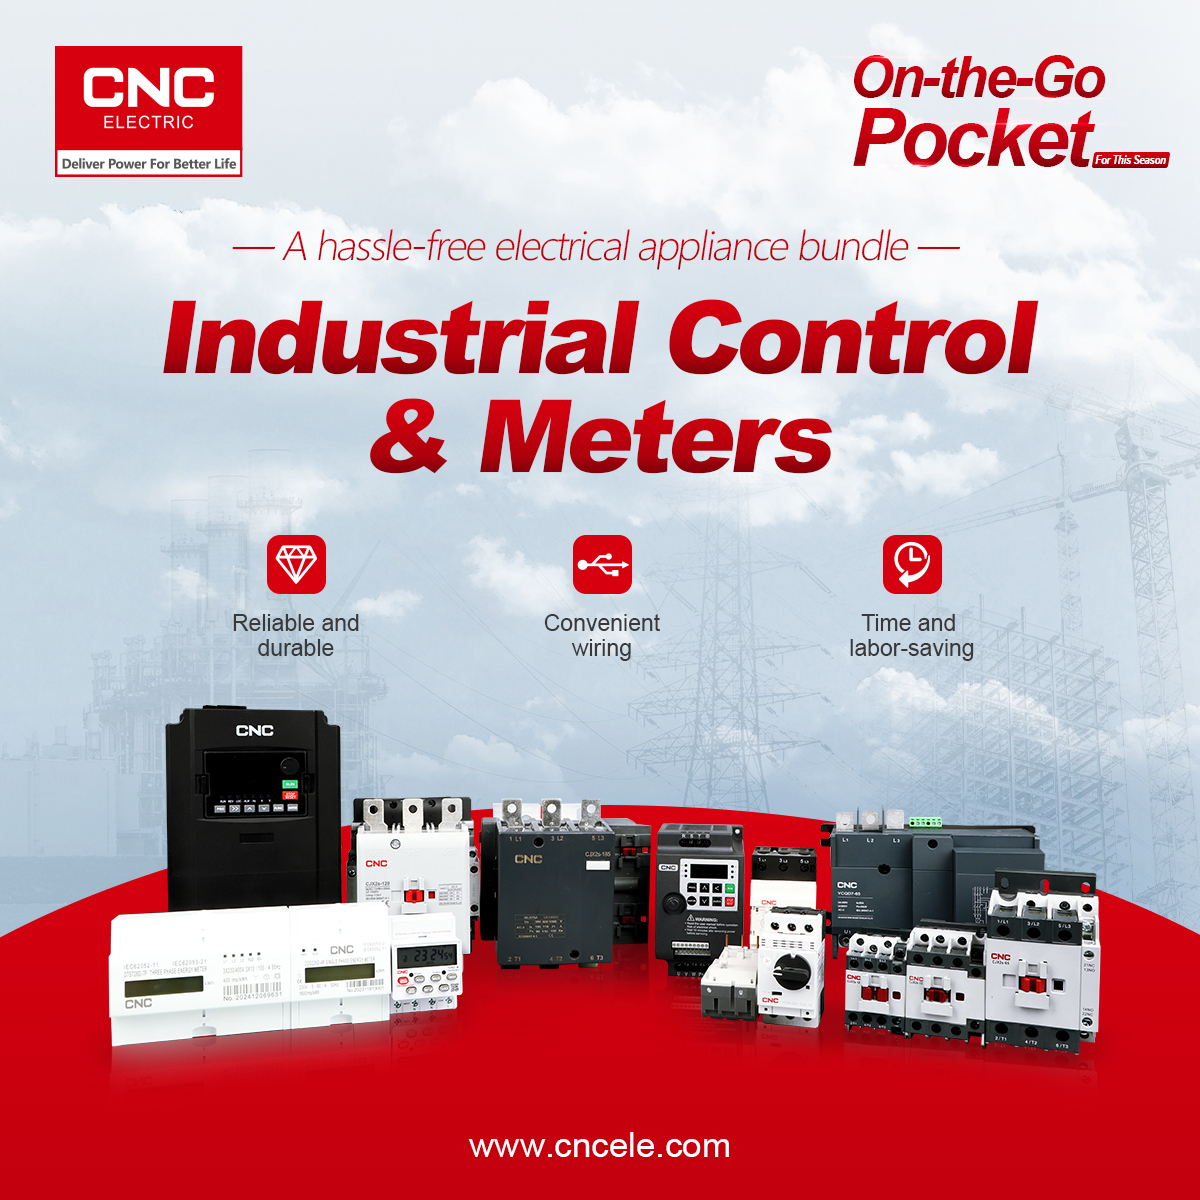 CNC | On-the-Go Pocket Launches the Third Series of Bestselling and Practical Industrial Control&Meters